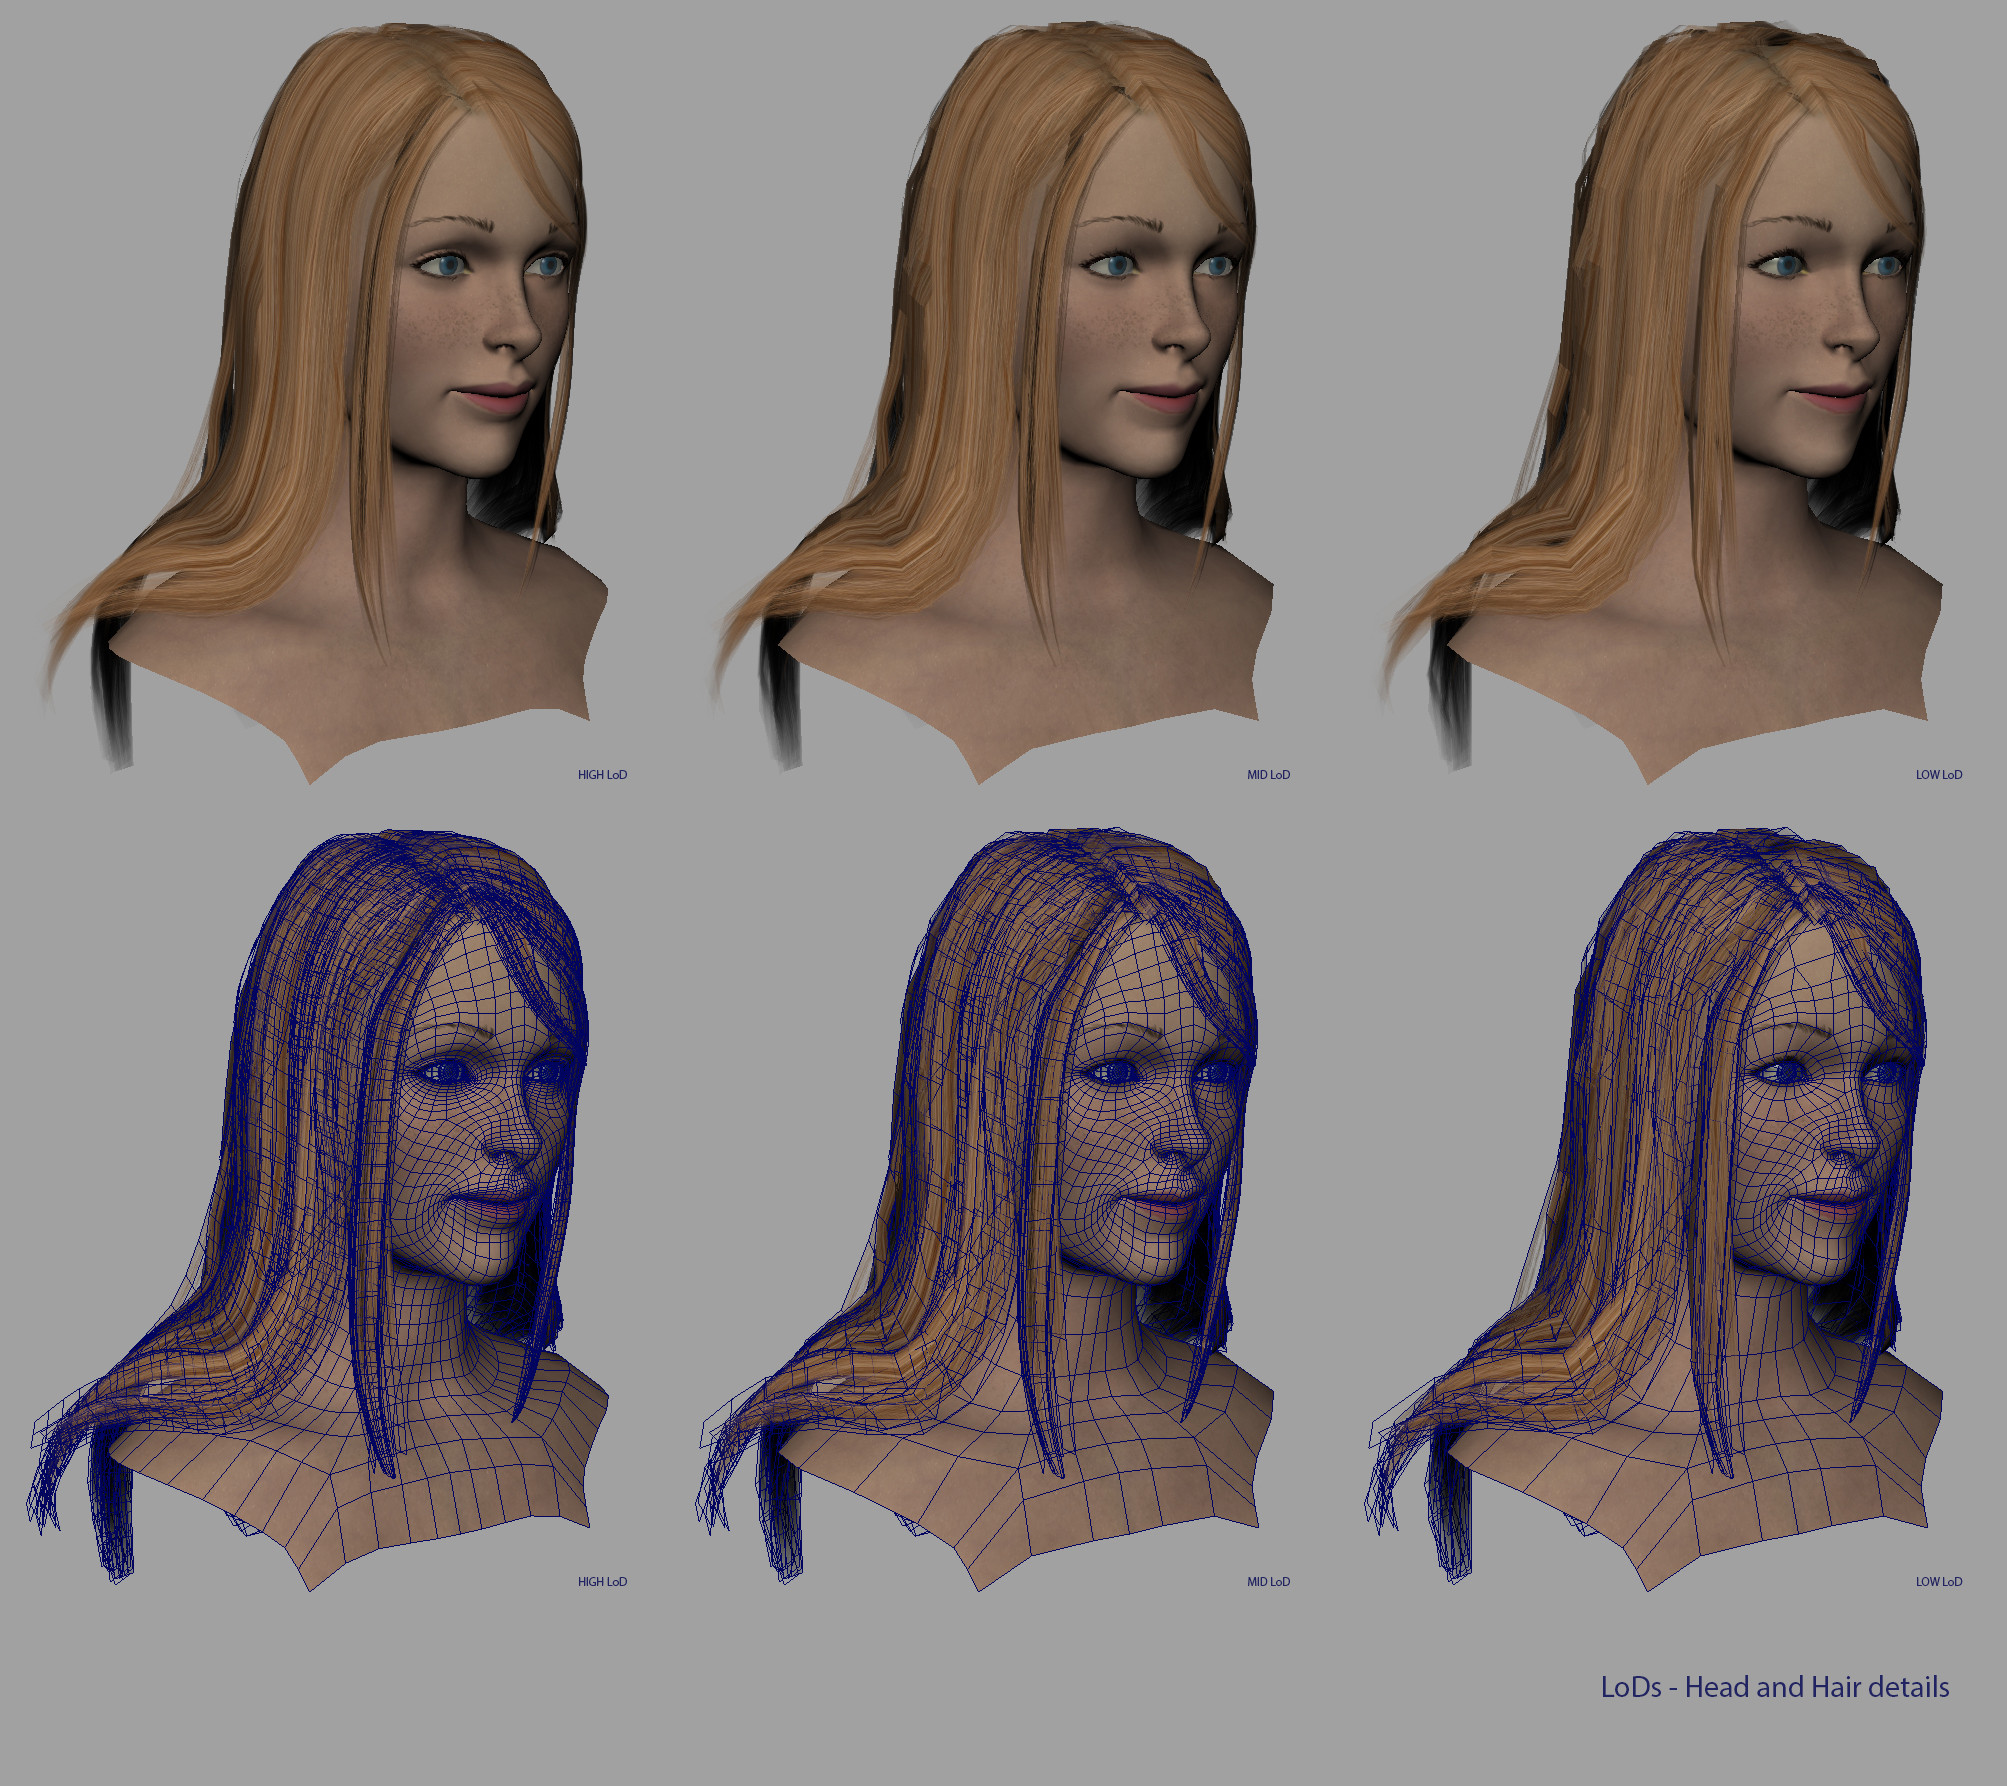 LoDs (levels of details) - detail on Head and Hair